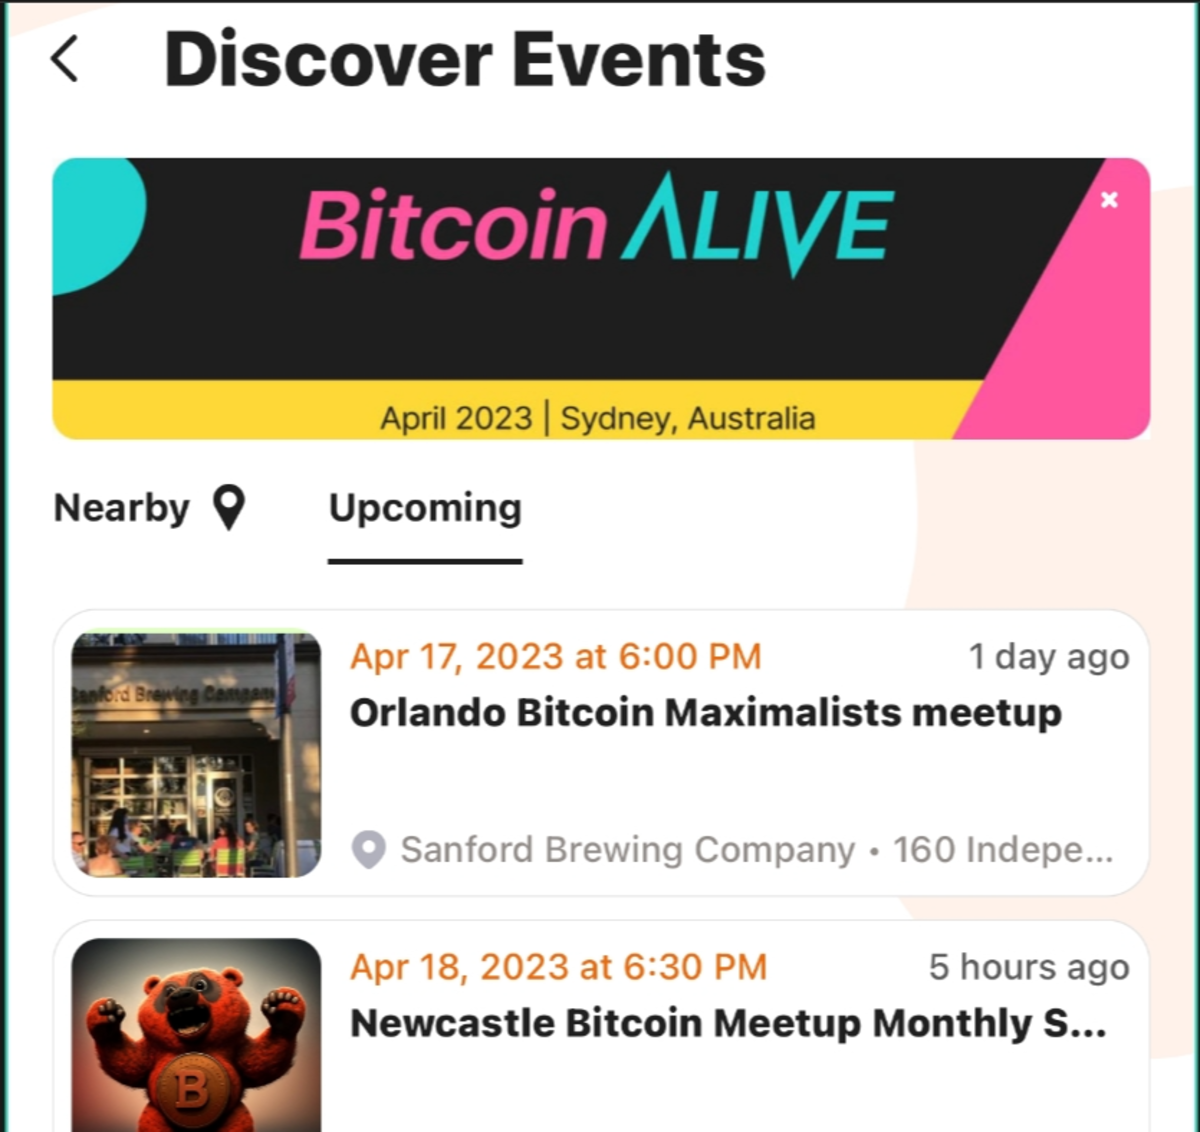 Orange Pill App brings Bitcoiners together, demonstrates demand for adoption to local businesses and propels the bitcoin standard.